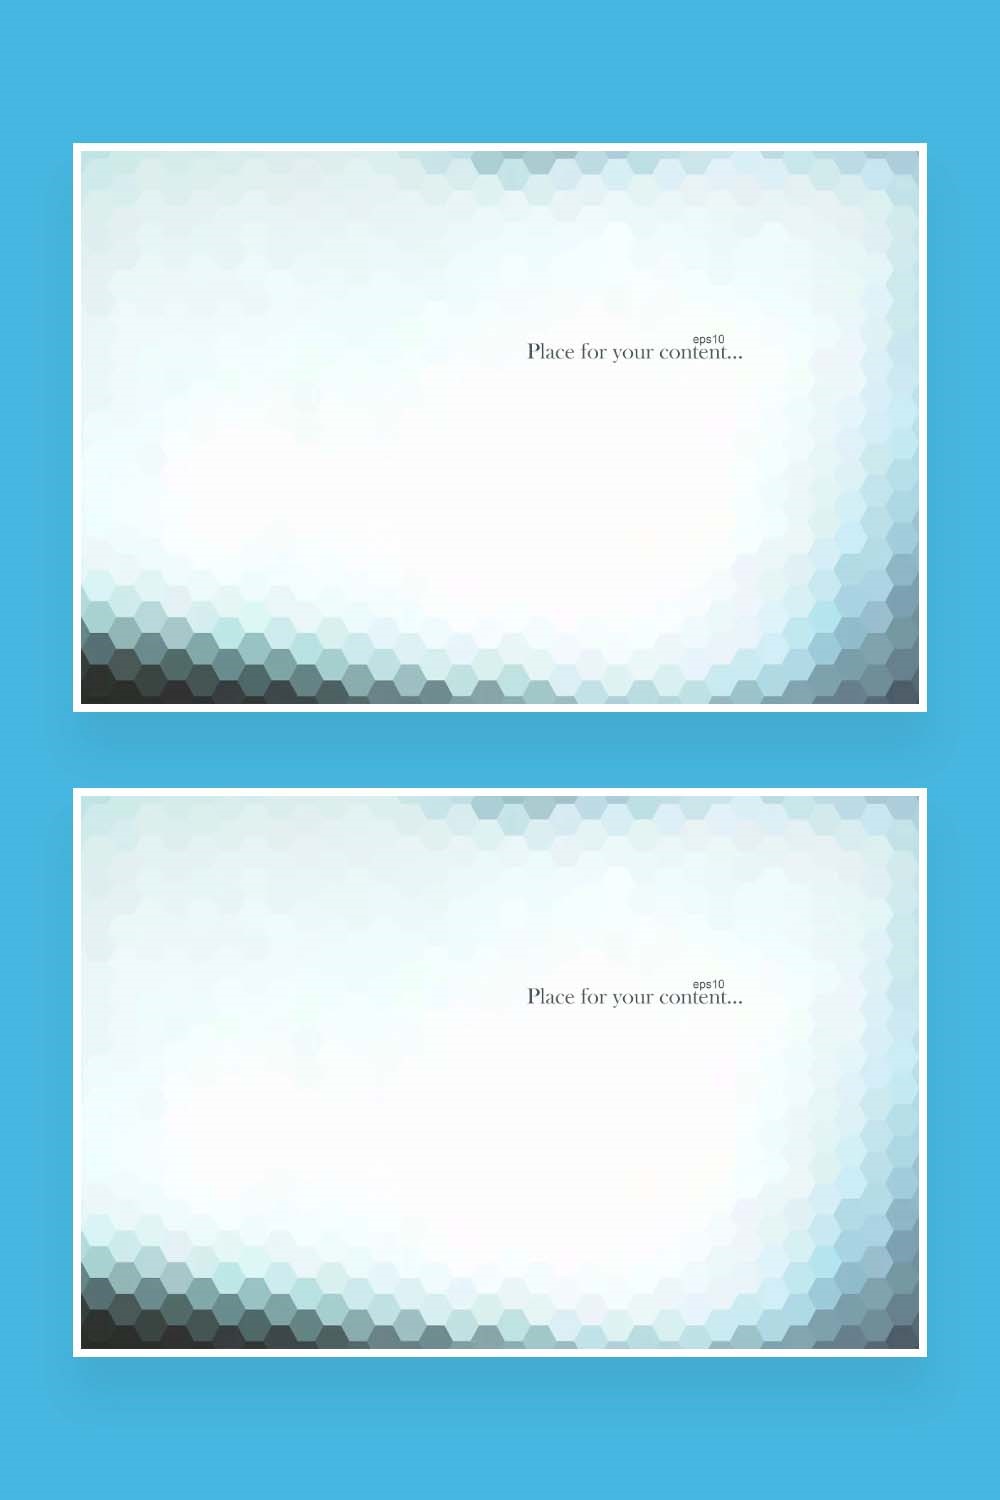 Two pictures with an Abstract background in the form of honeycombs with a gradient from gray-turquoise to white.